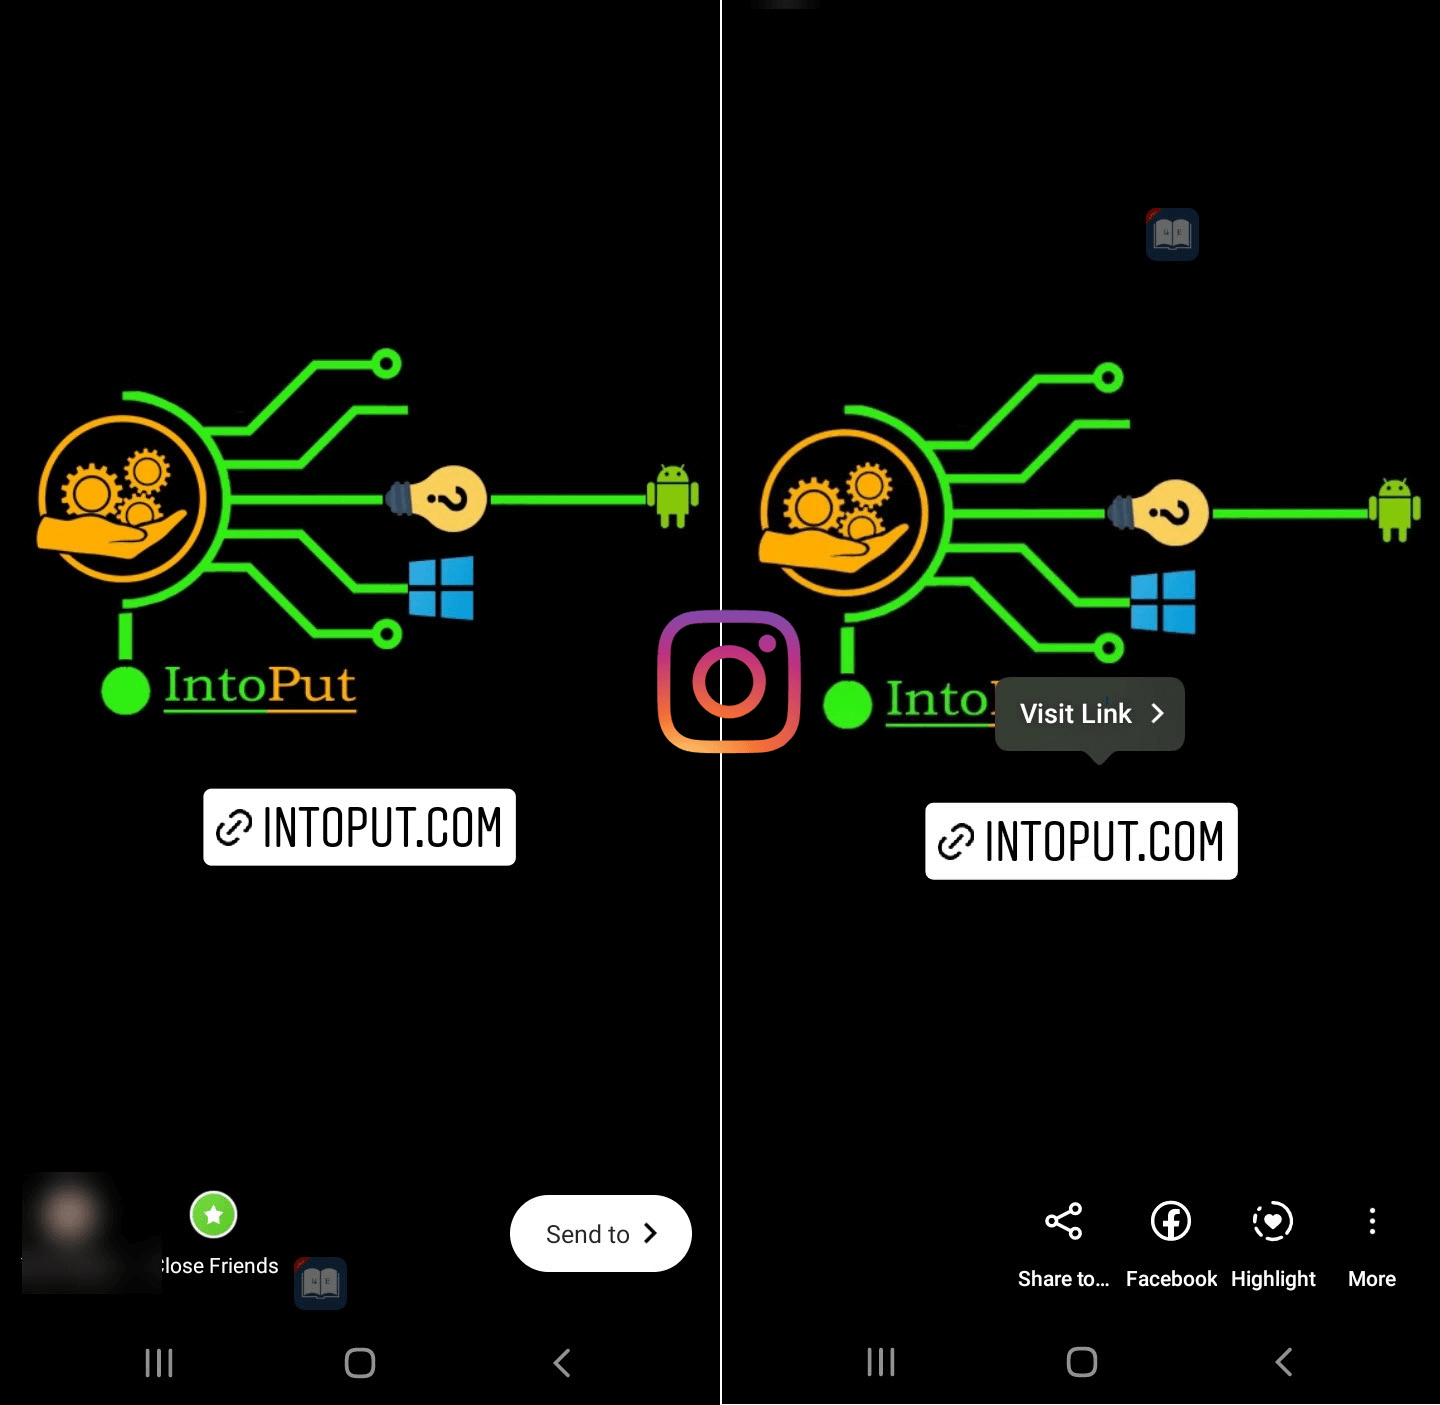 How to Add Link to Instagram Story Without Being Verified [Android & iOS]